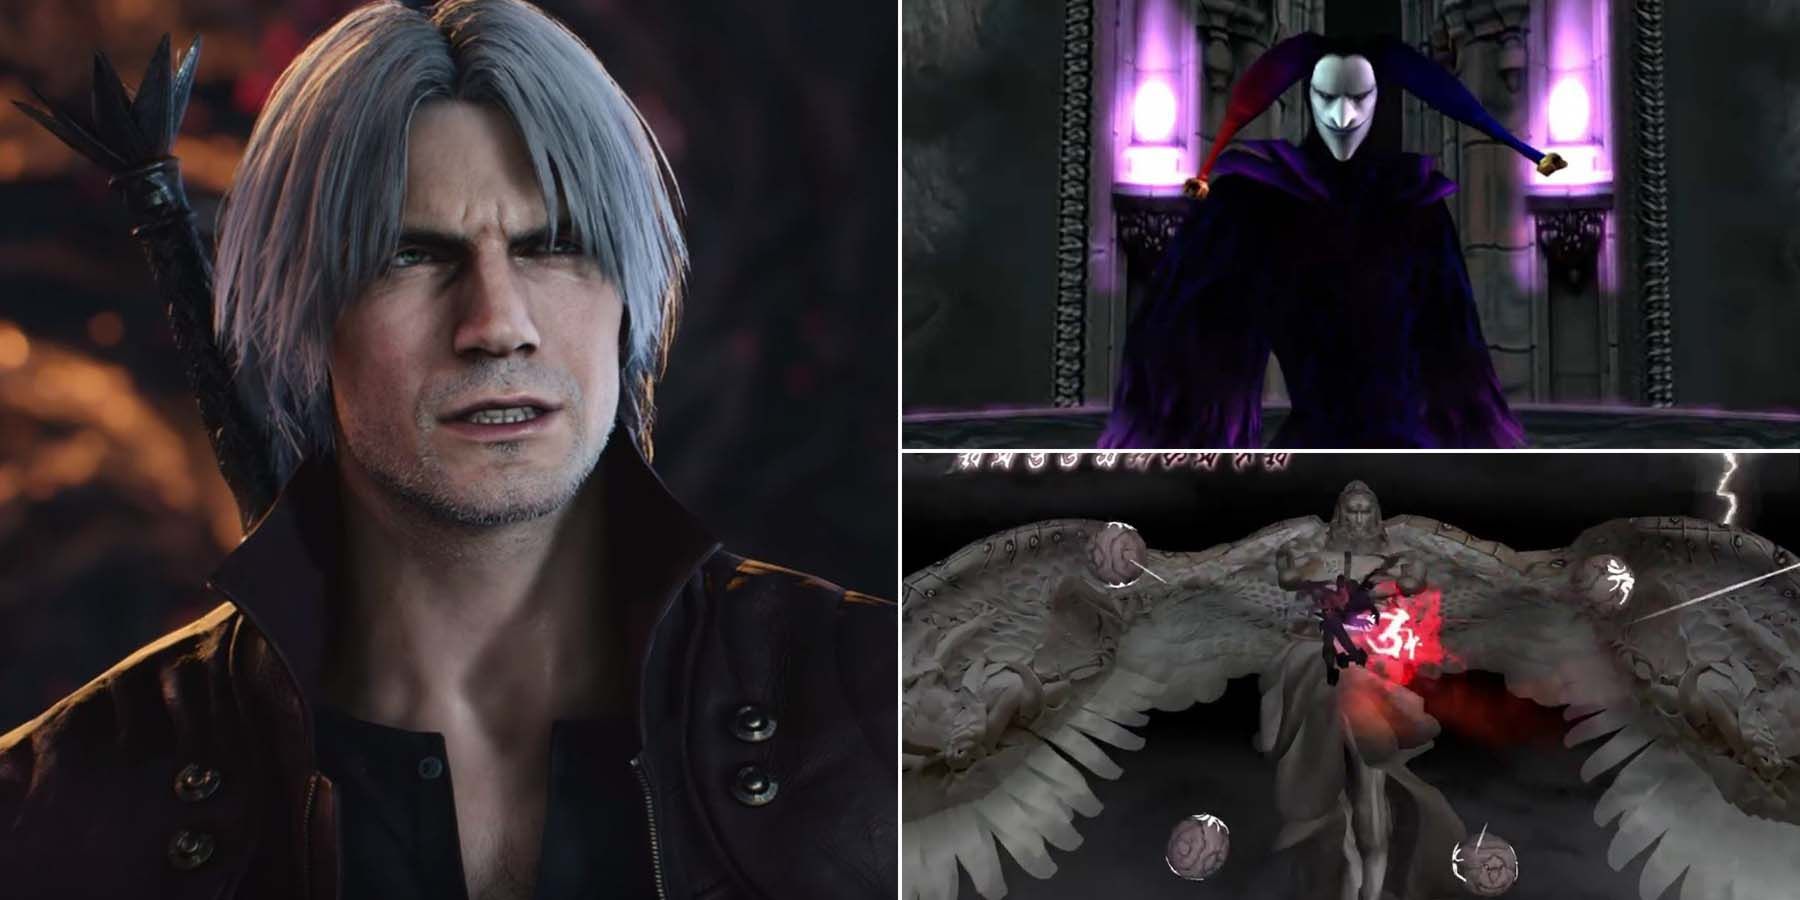 Arkham as the Jester from Devil May Cry 3!